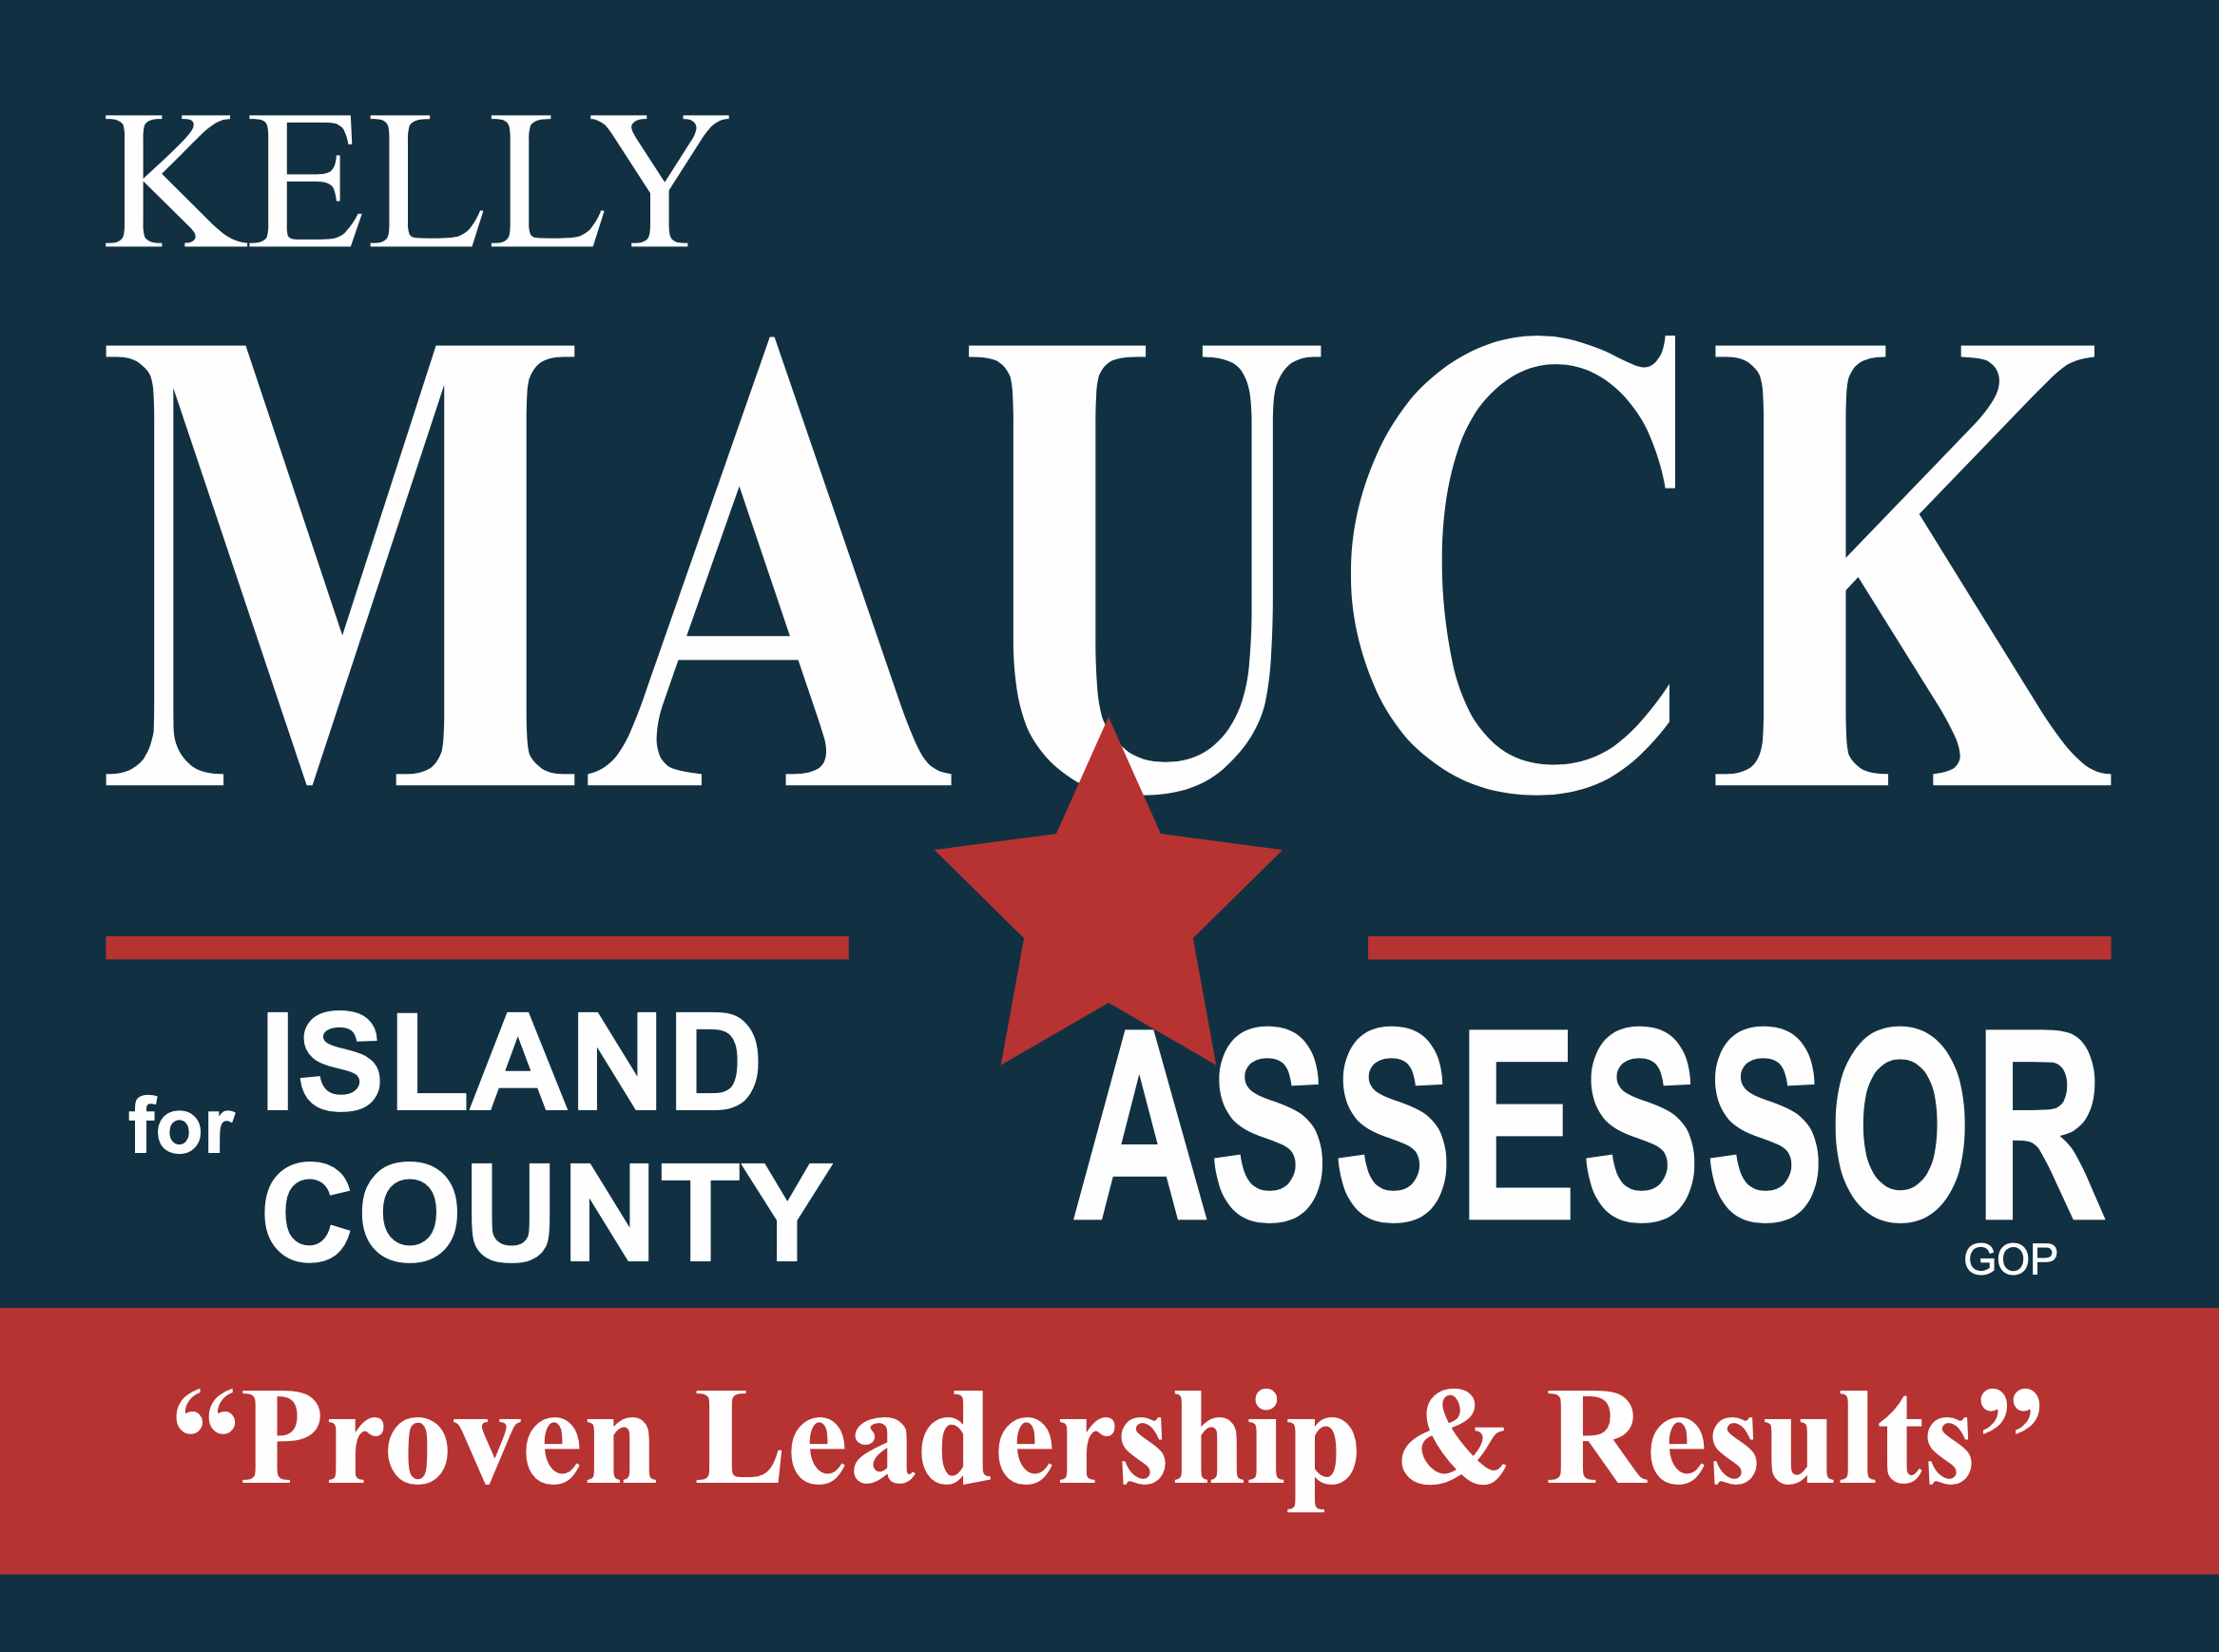 Mauck for Island County Assessor